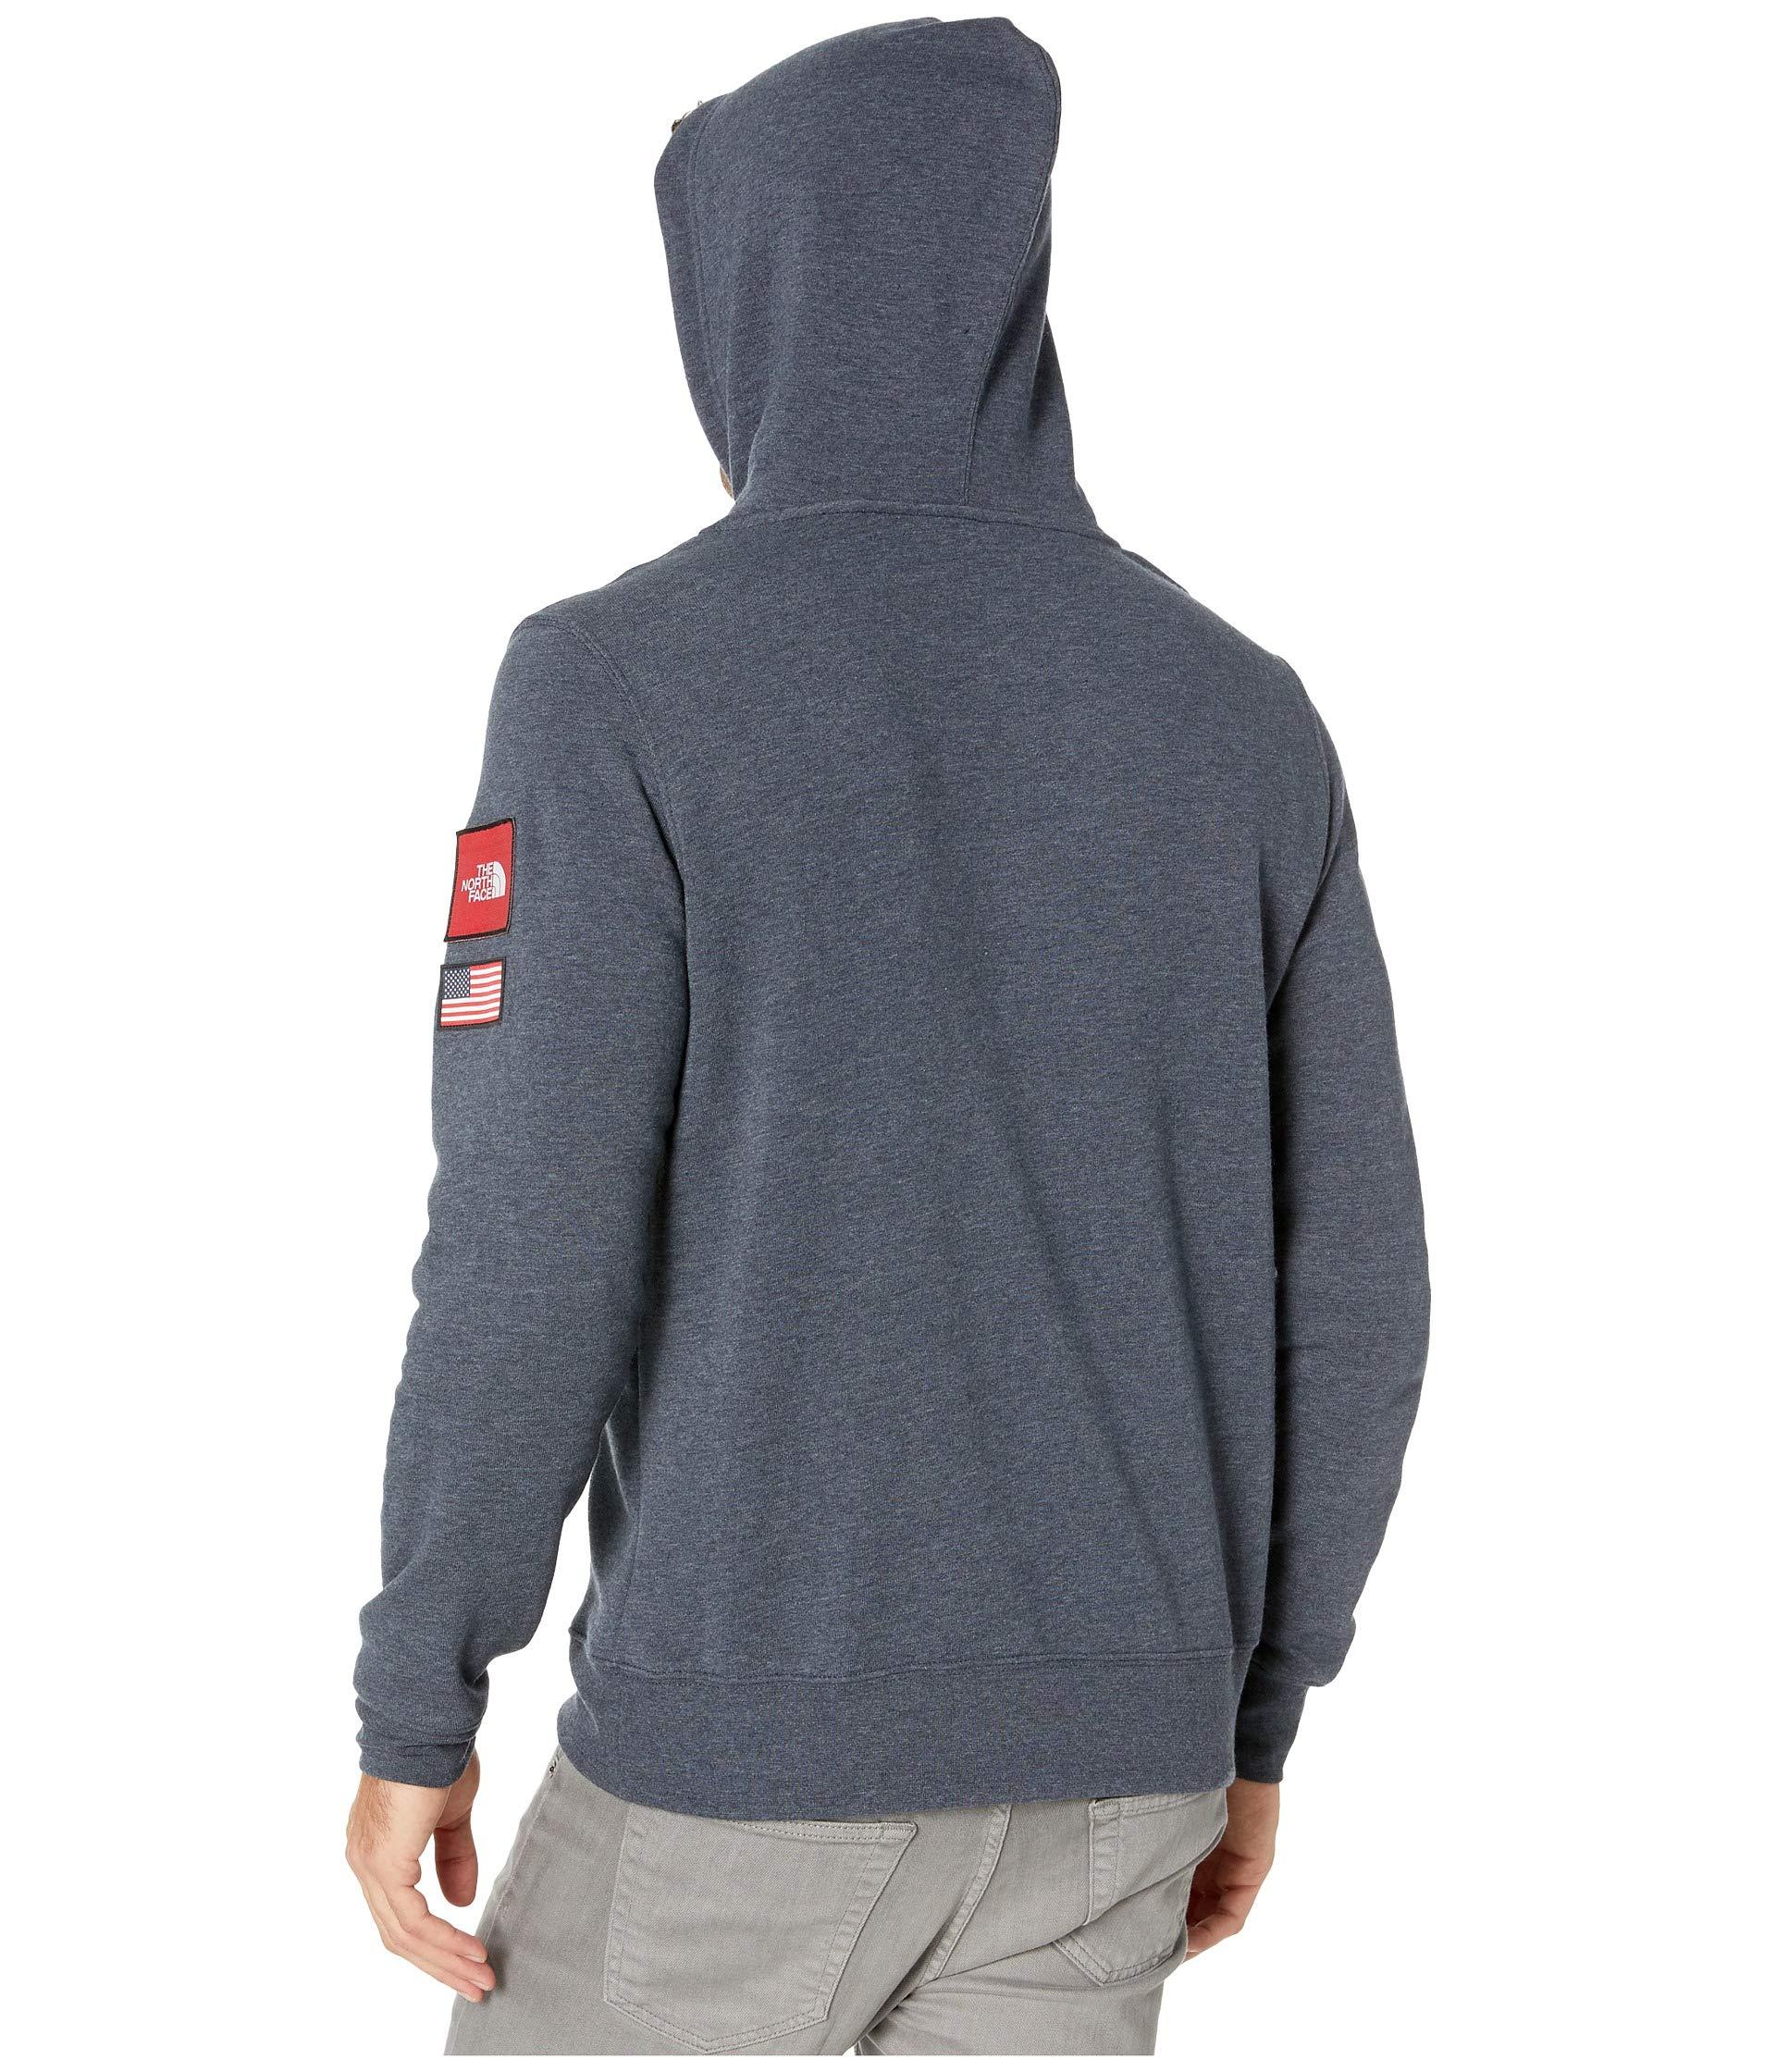 the north face men's americana pullover hoodie